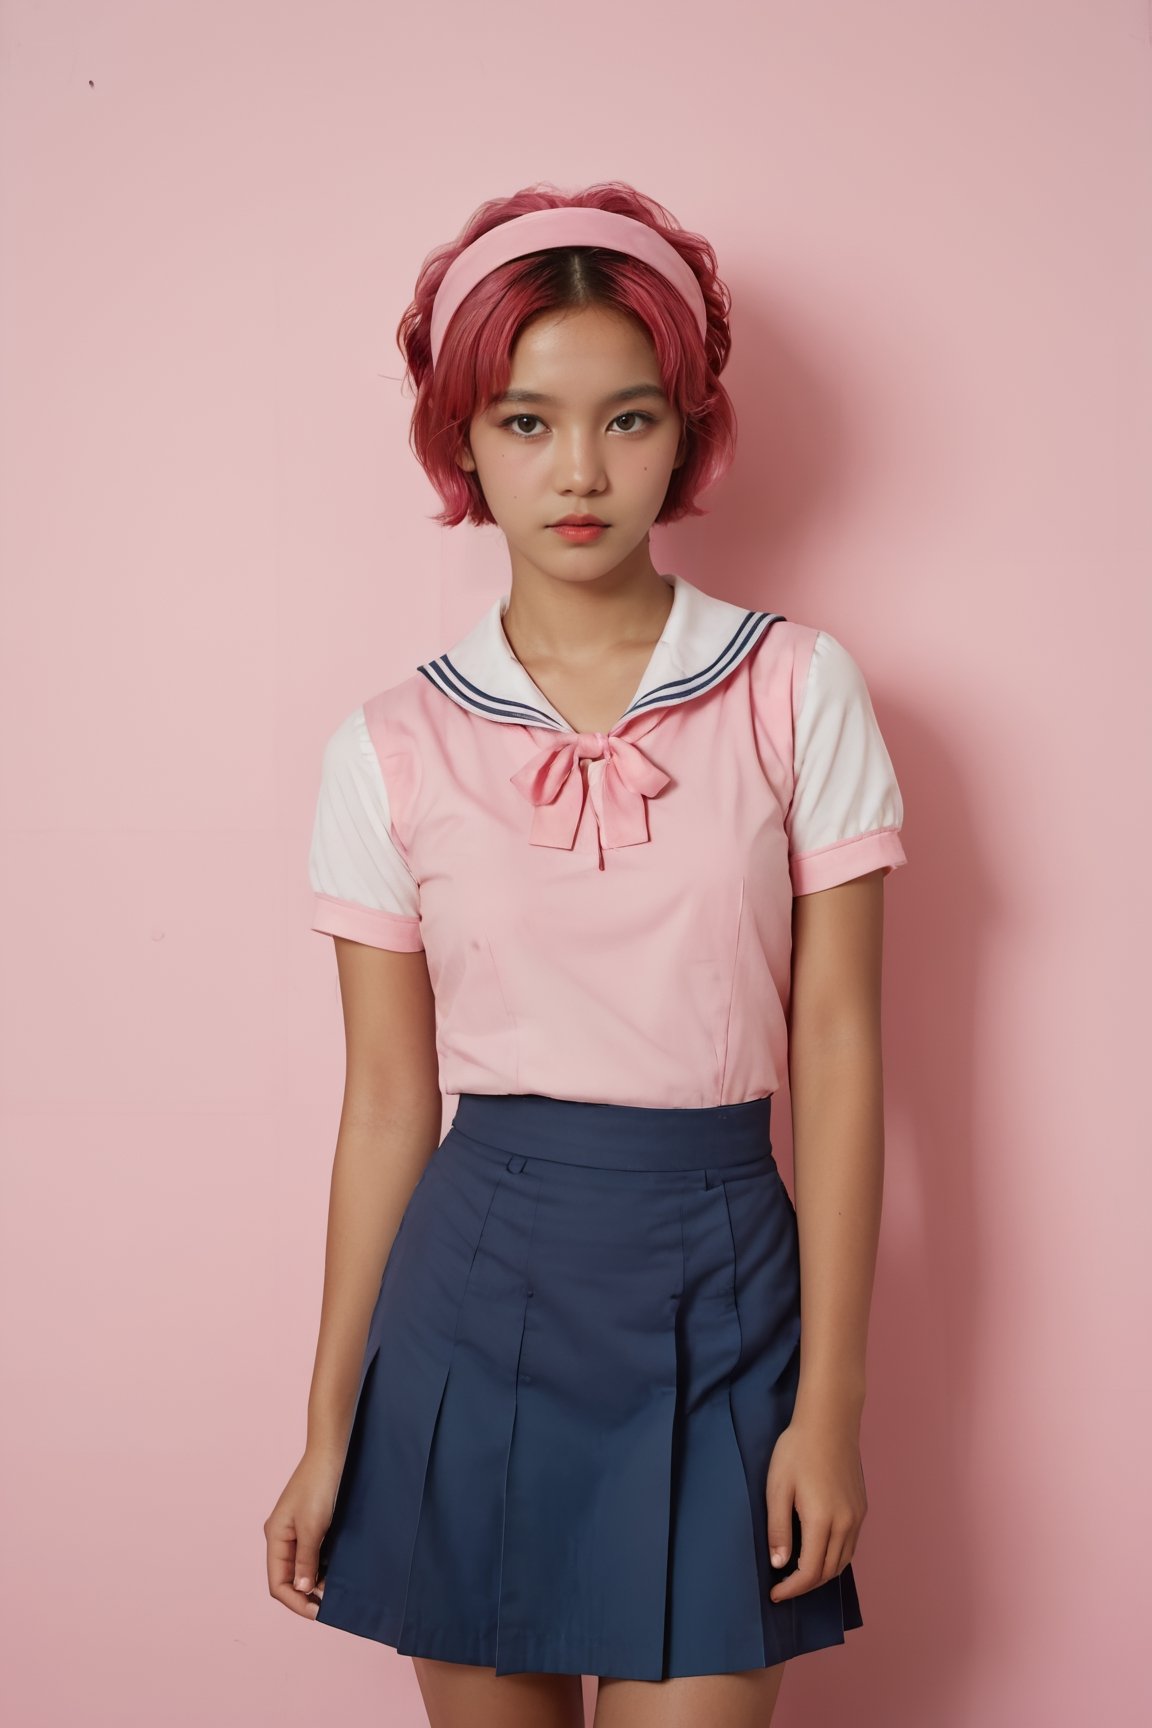 A full body portrait,  hyperdetailed indonesian photography,  by Elizabeth Polunin,  pink colour short hair young indonesian schoolgirl,  brooklyn,  looking straight to camera,  sweaty,  olya bossak,  nepal,  very accurate photo,  suspiria,  pink wall backgroung,  wear pink Headband,  dressed in a sailor uniform, with a white top and a blue skirt,